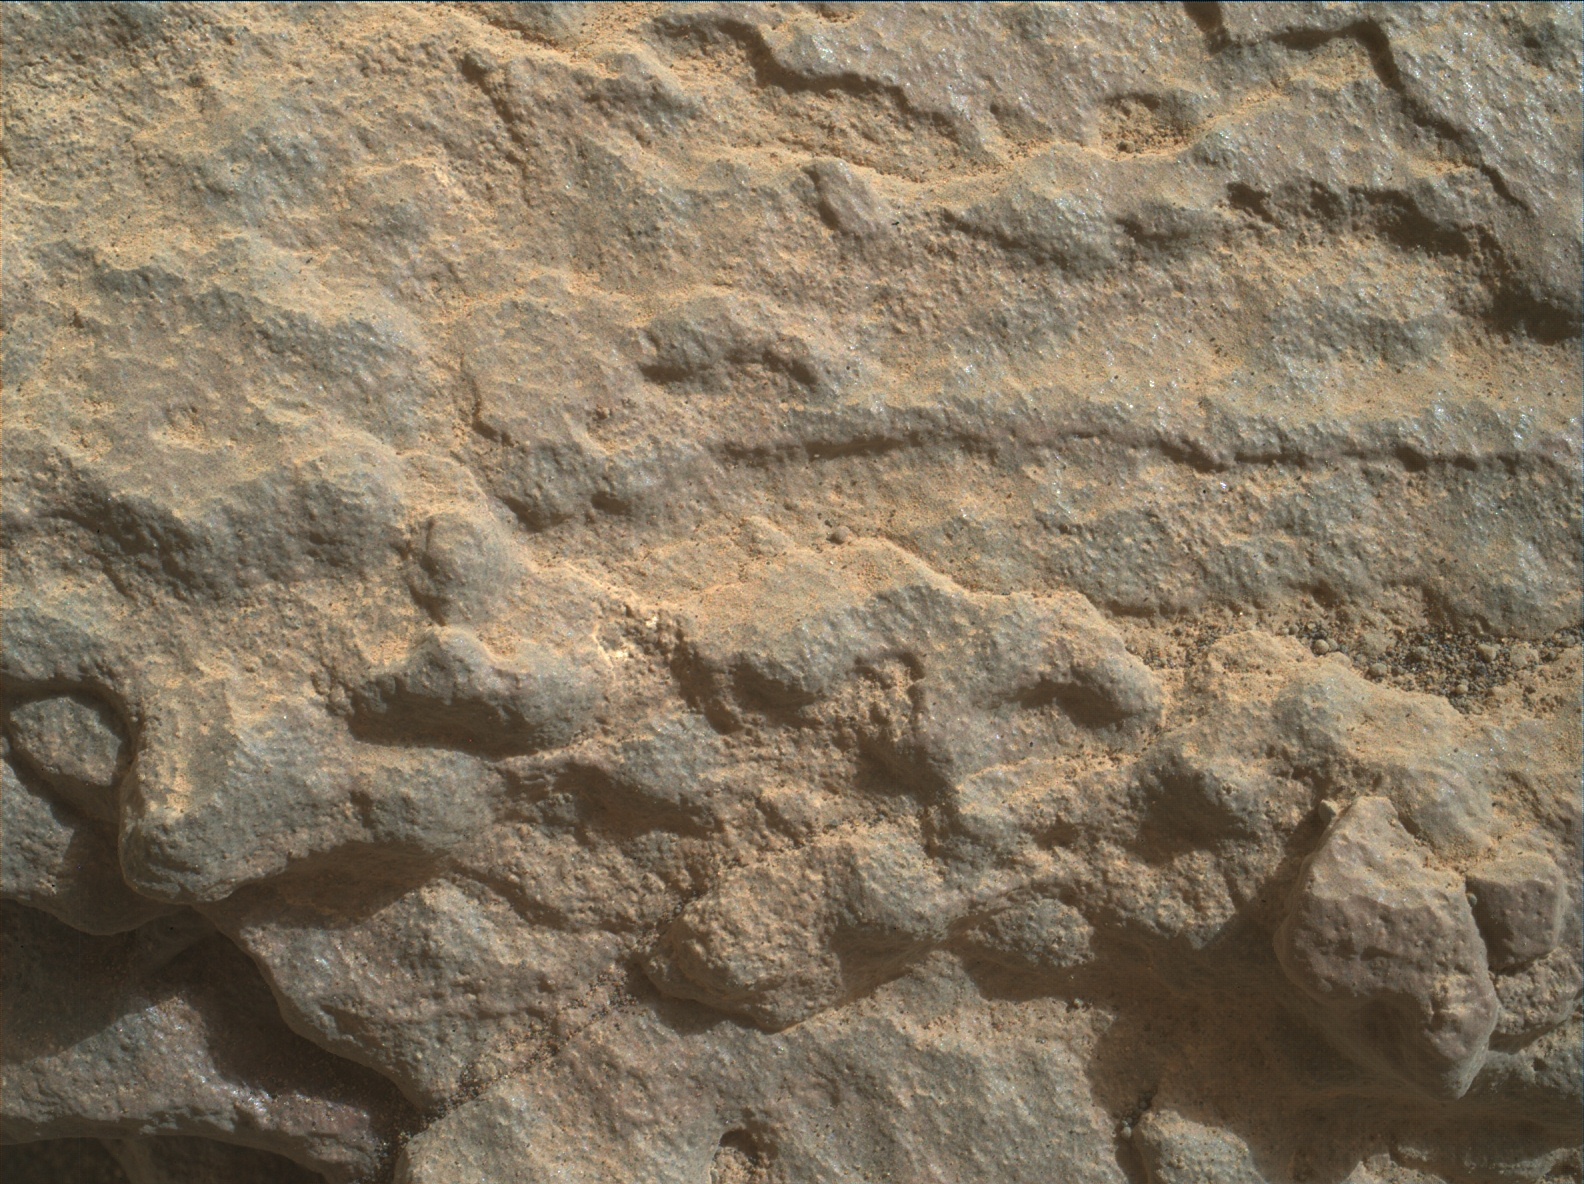 Nasa's Mars rover Curiosity acquired this image using its Mars Hand Lens Imager (MAHLI) on Sol 1714